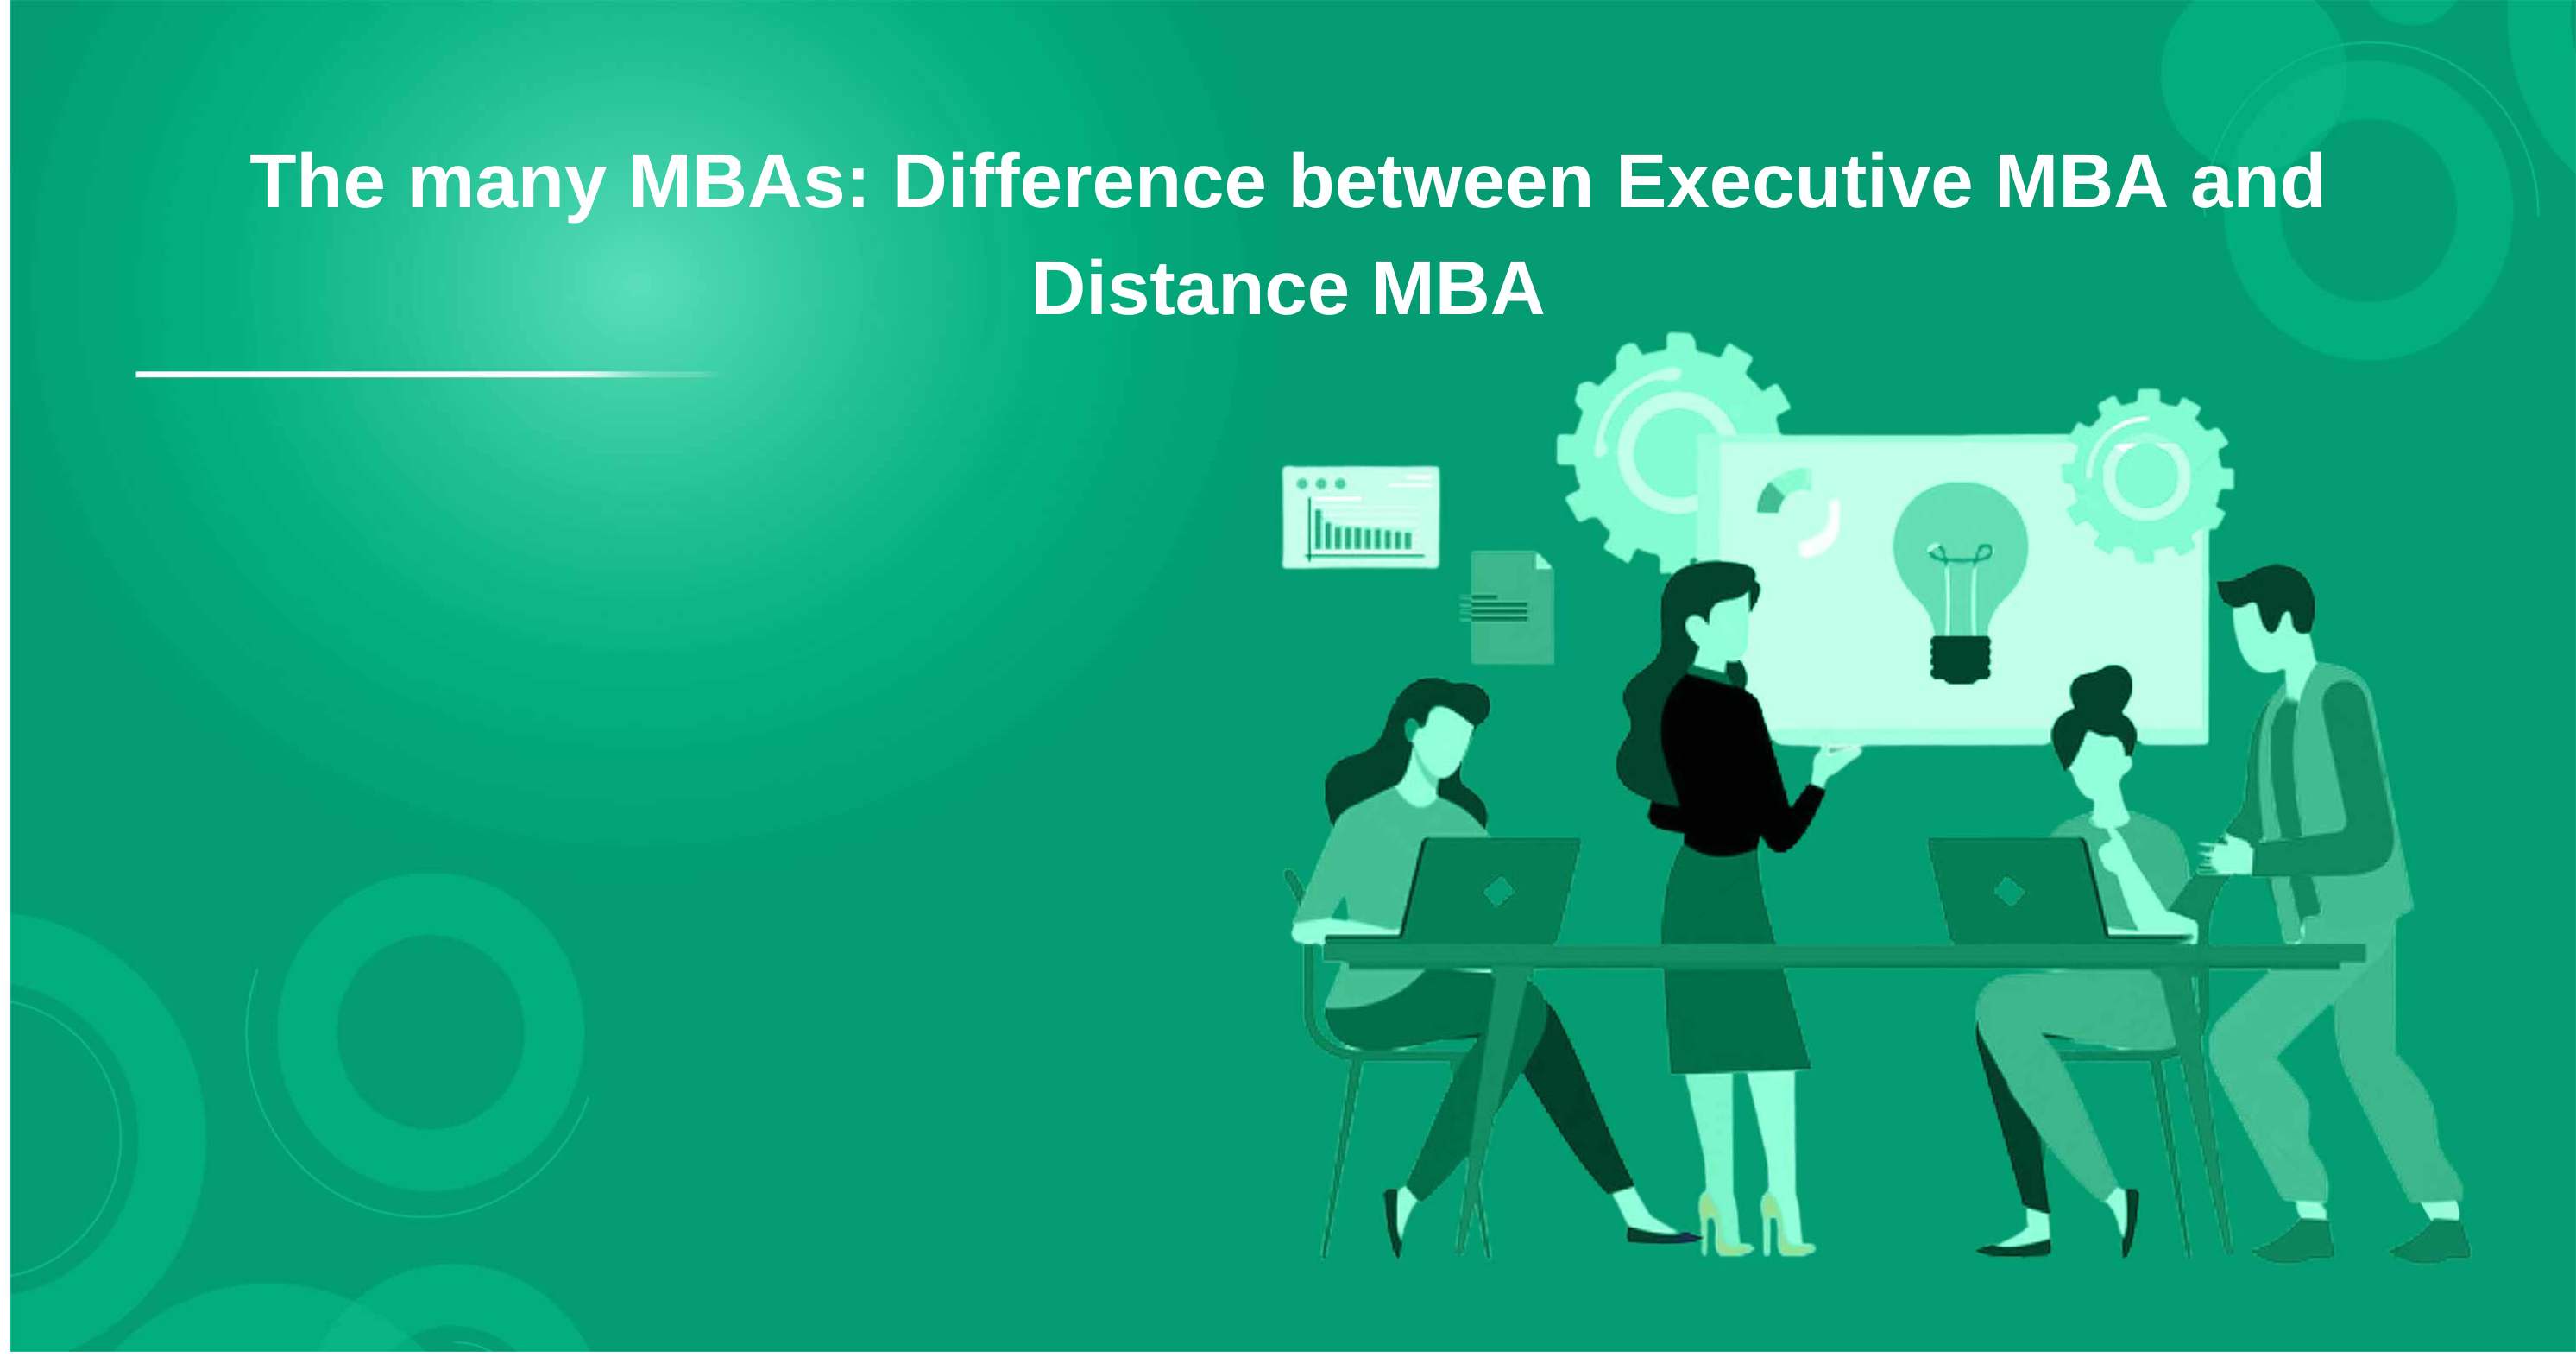 The many MBAs: Difference between Executive MBA and Distance MBA